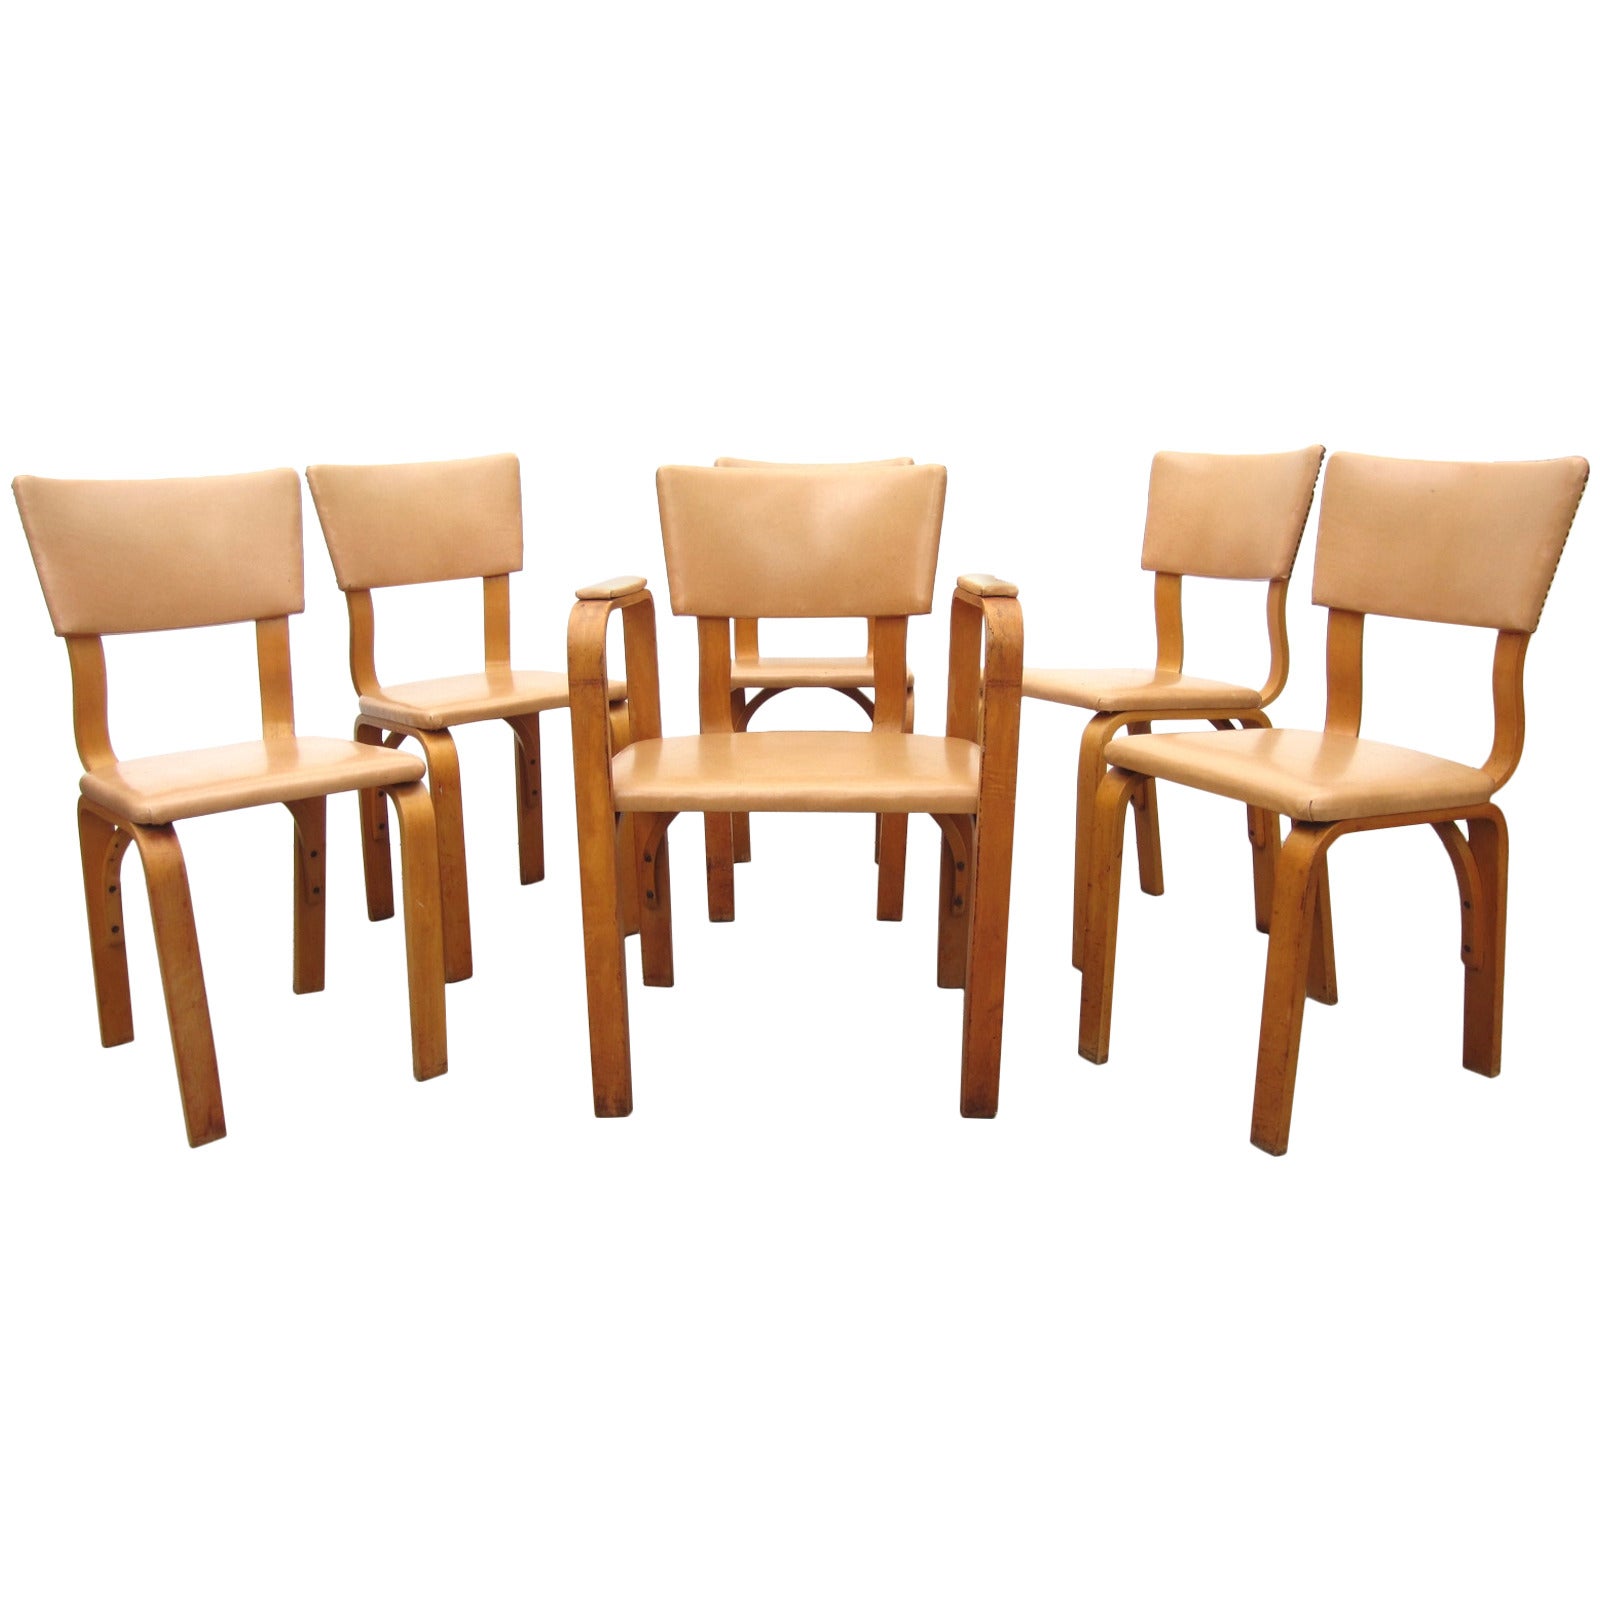 Michael Thonet Birch Bentwood Dining Chairs, Captain Armchair and Five Side